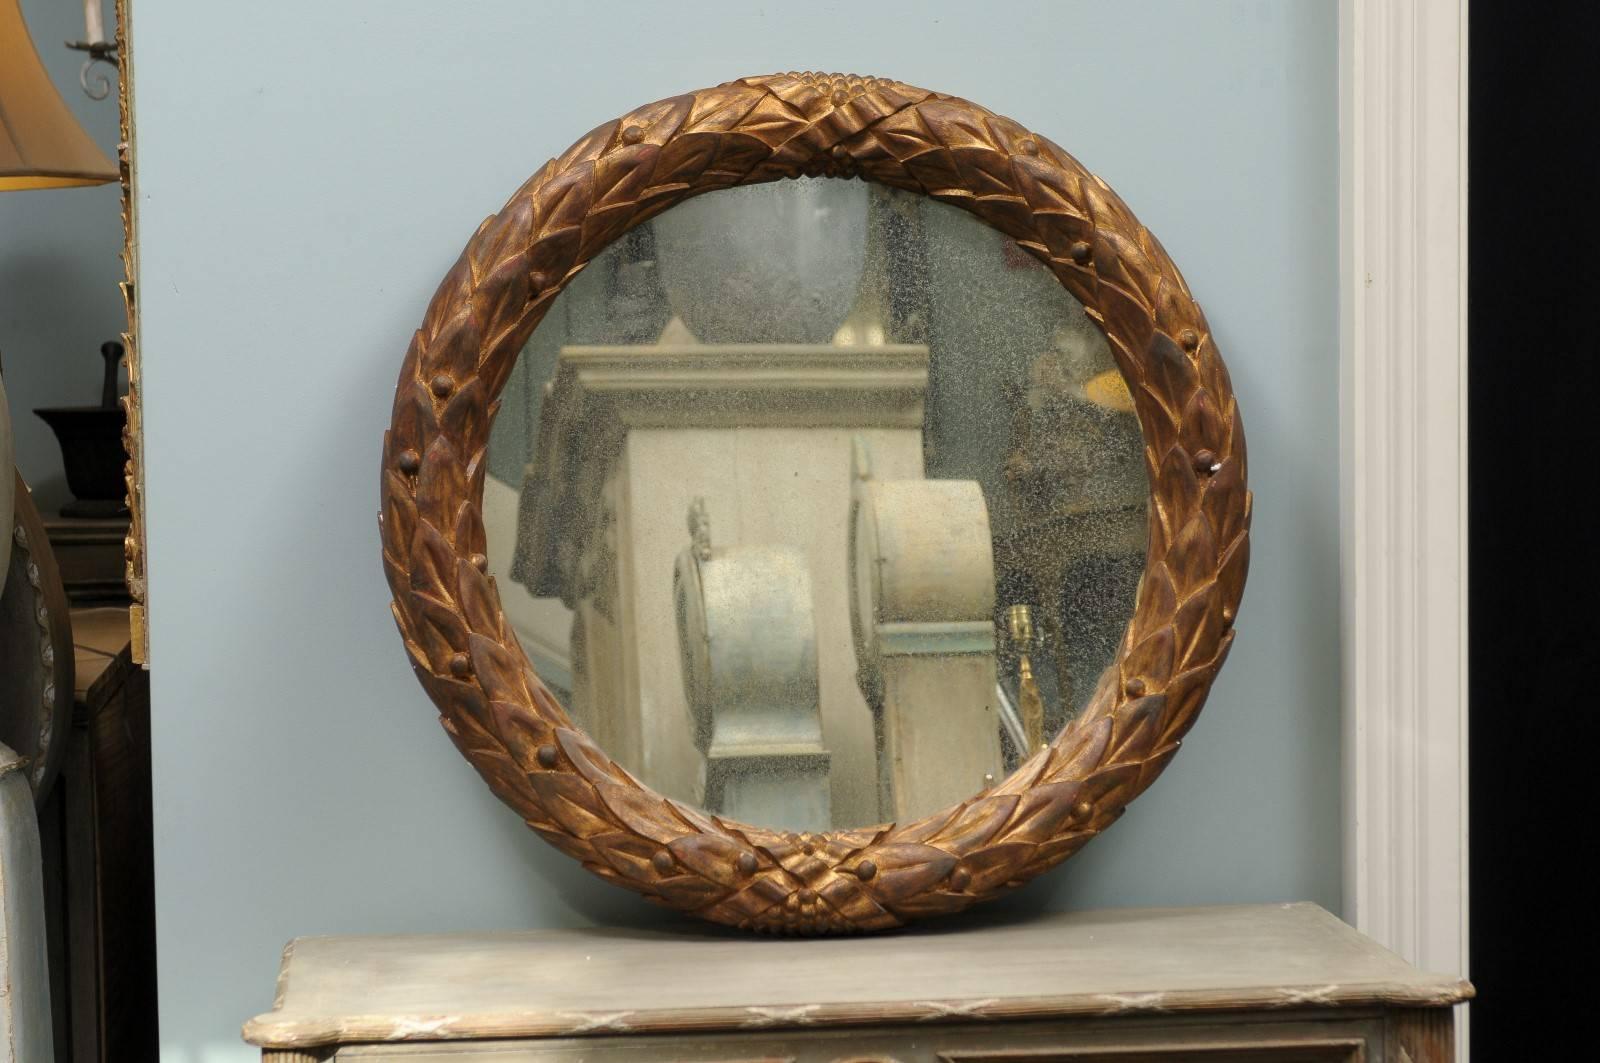 The Garland gilded wood circular mirror. This handmade circular Venetian style mirror features a gilded wood garland motif frame. The central glass has a lightly antiqued finish. The frame shows a gold color with brown accents. This would be a great